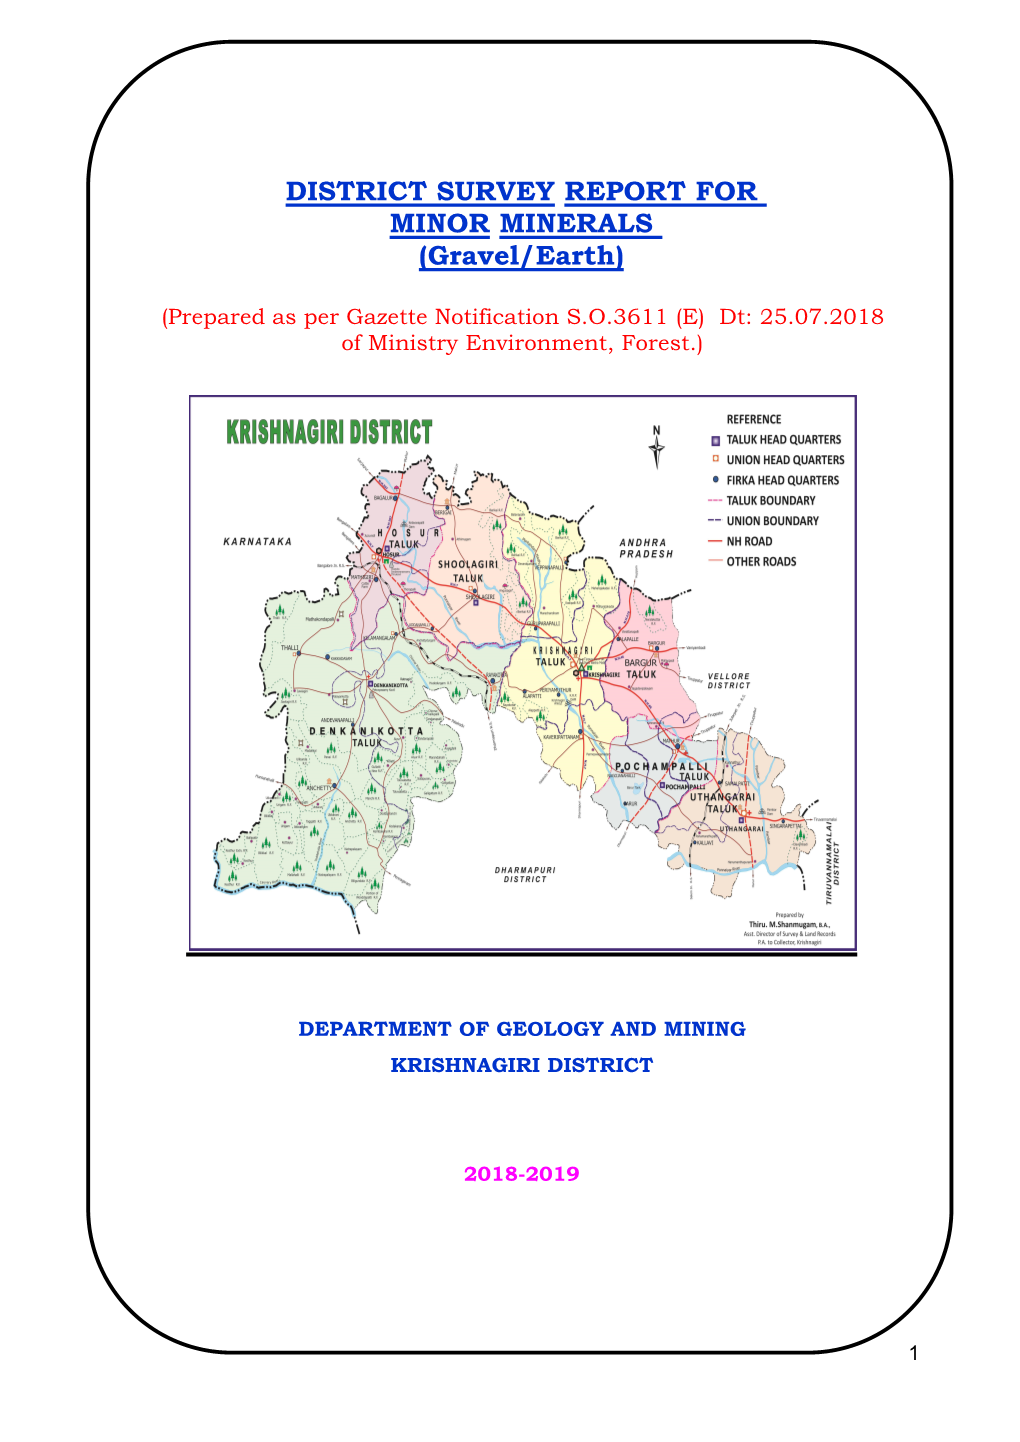 DISTRICT SURVEY REPORT for MINOR MINERALS (Gravel/Earth)